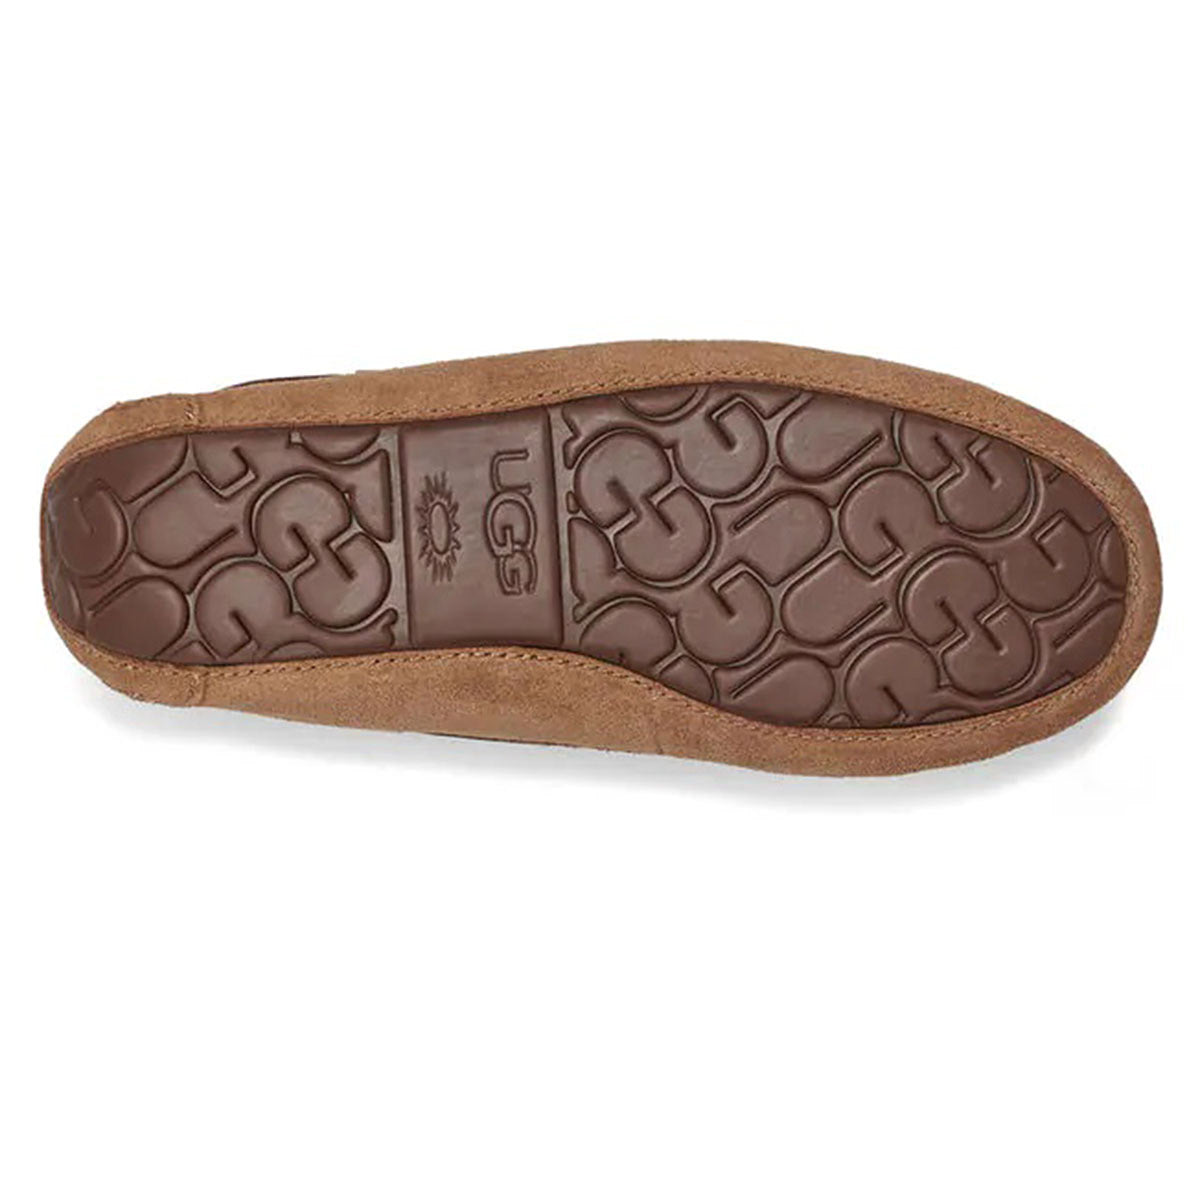 Sole of a genuine UGGpure, moccasin-inspired slipper with tread pattern and branding detail. - UGG DAKOTA CHESTNUT - WOMENS by Ugg